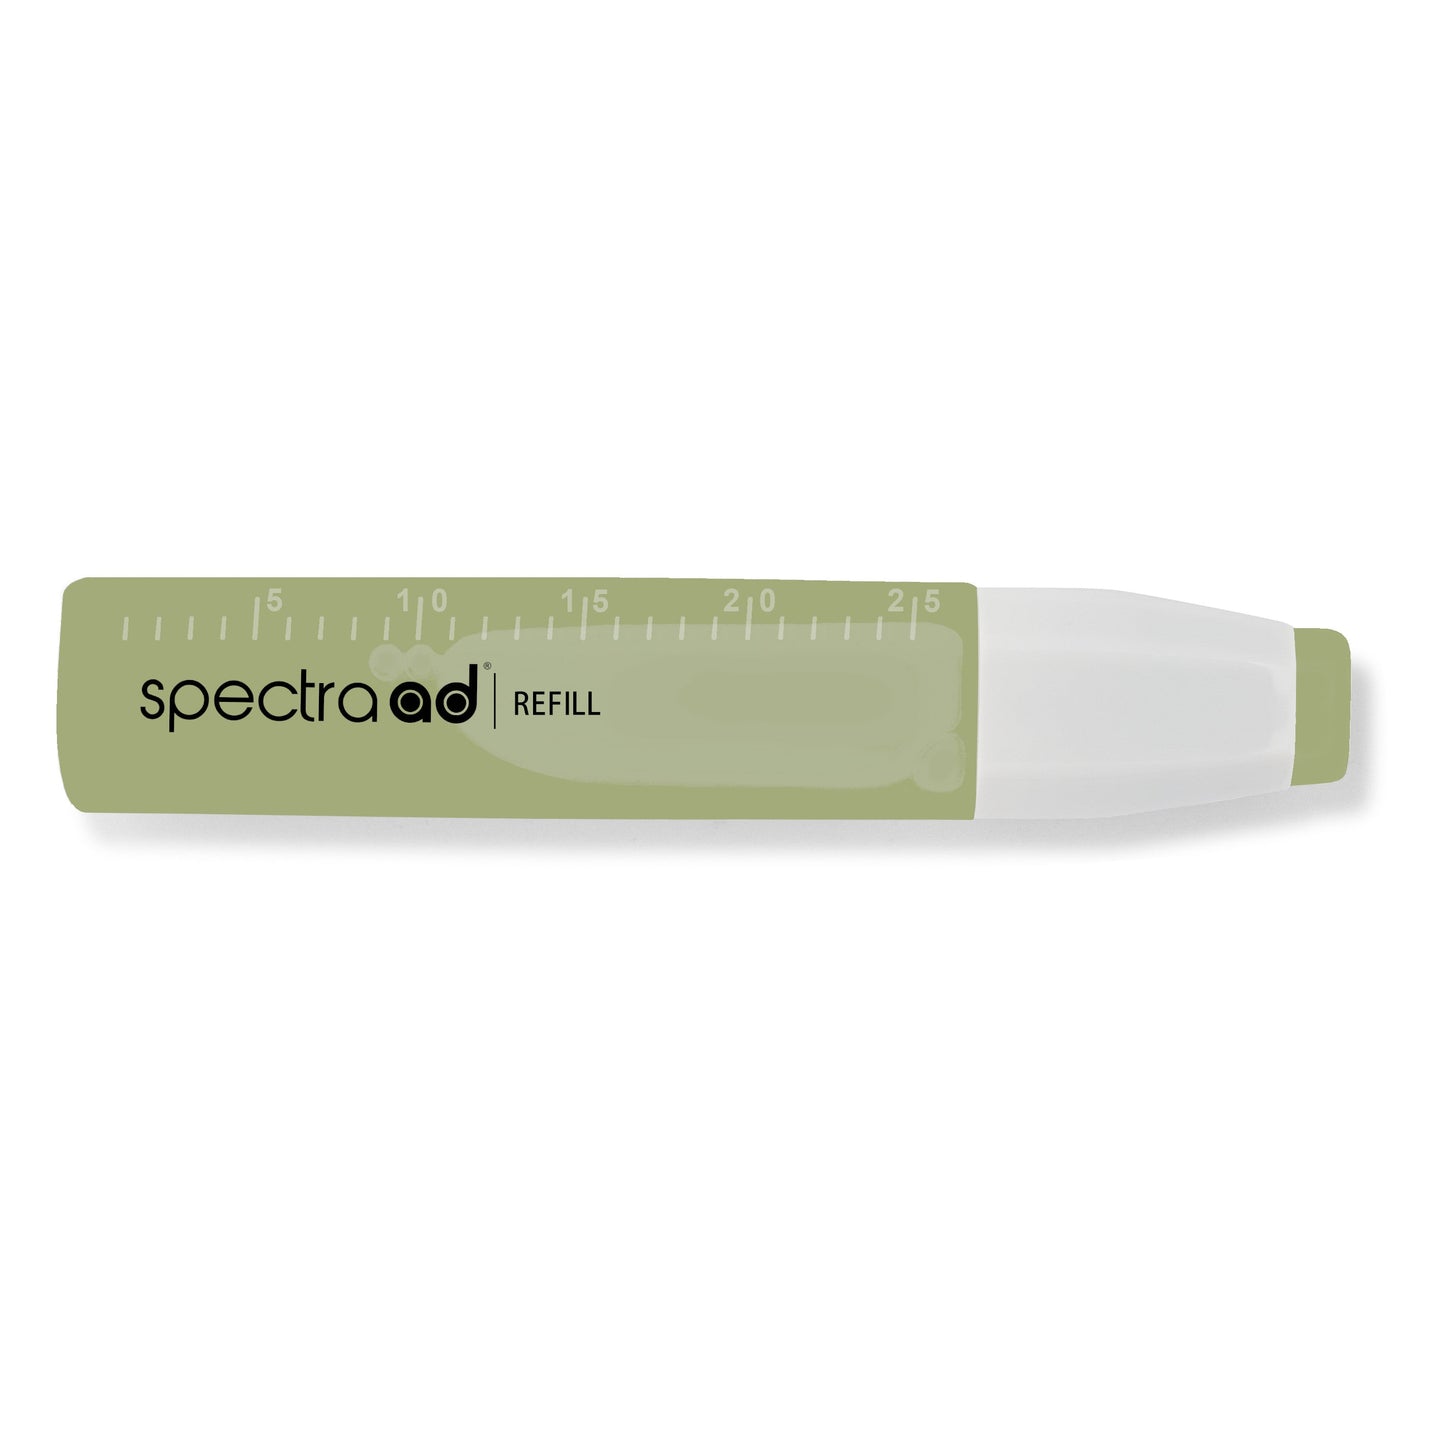 070 - Olive - Spectra AD Refill Bottle